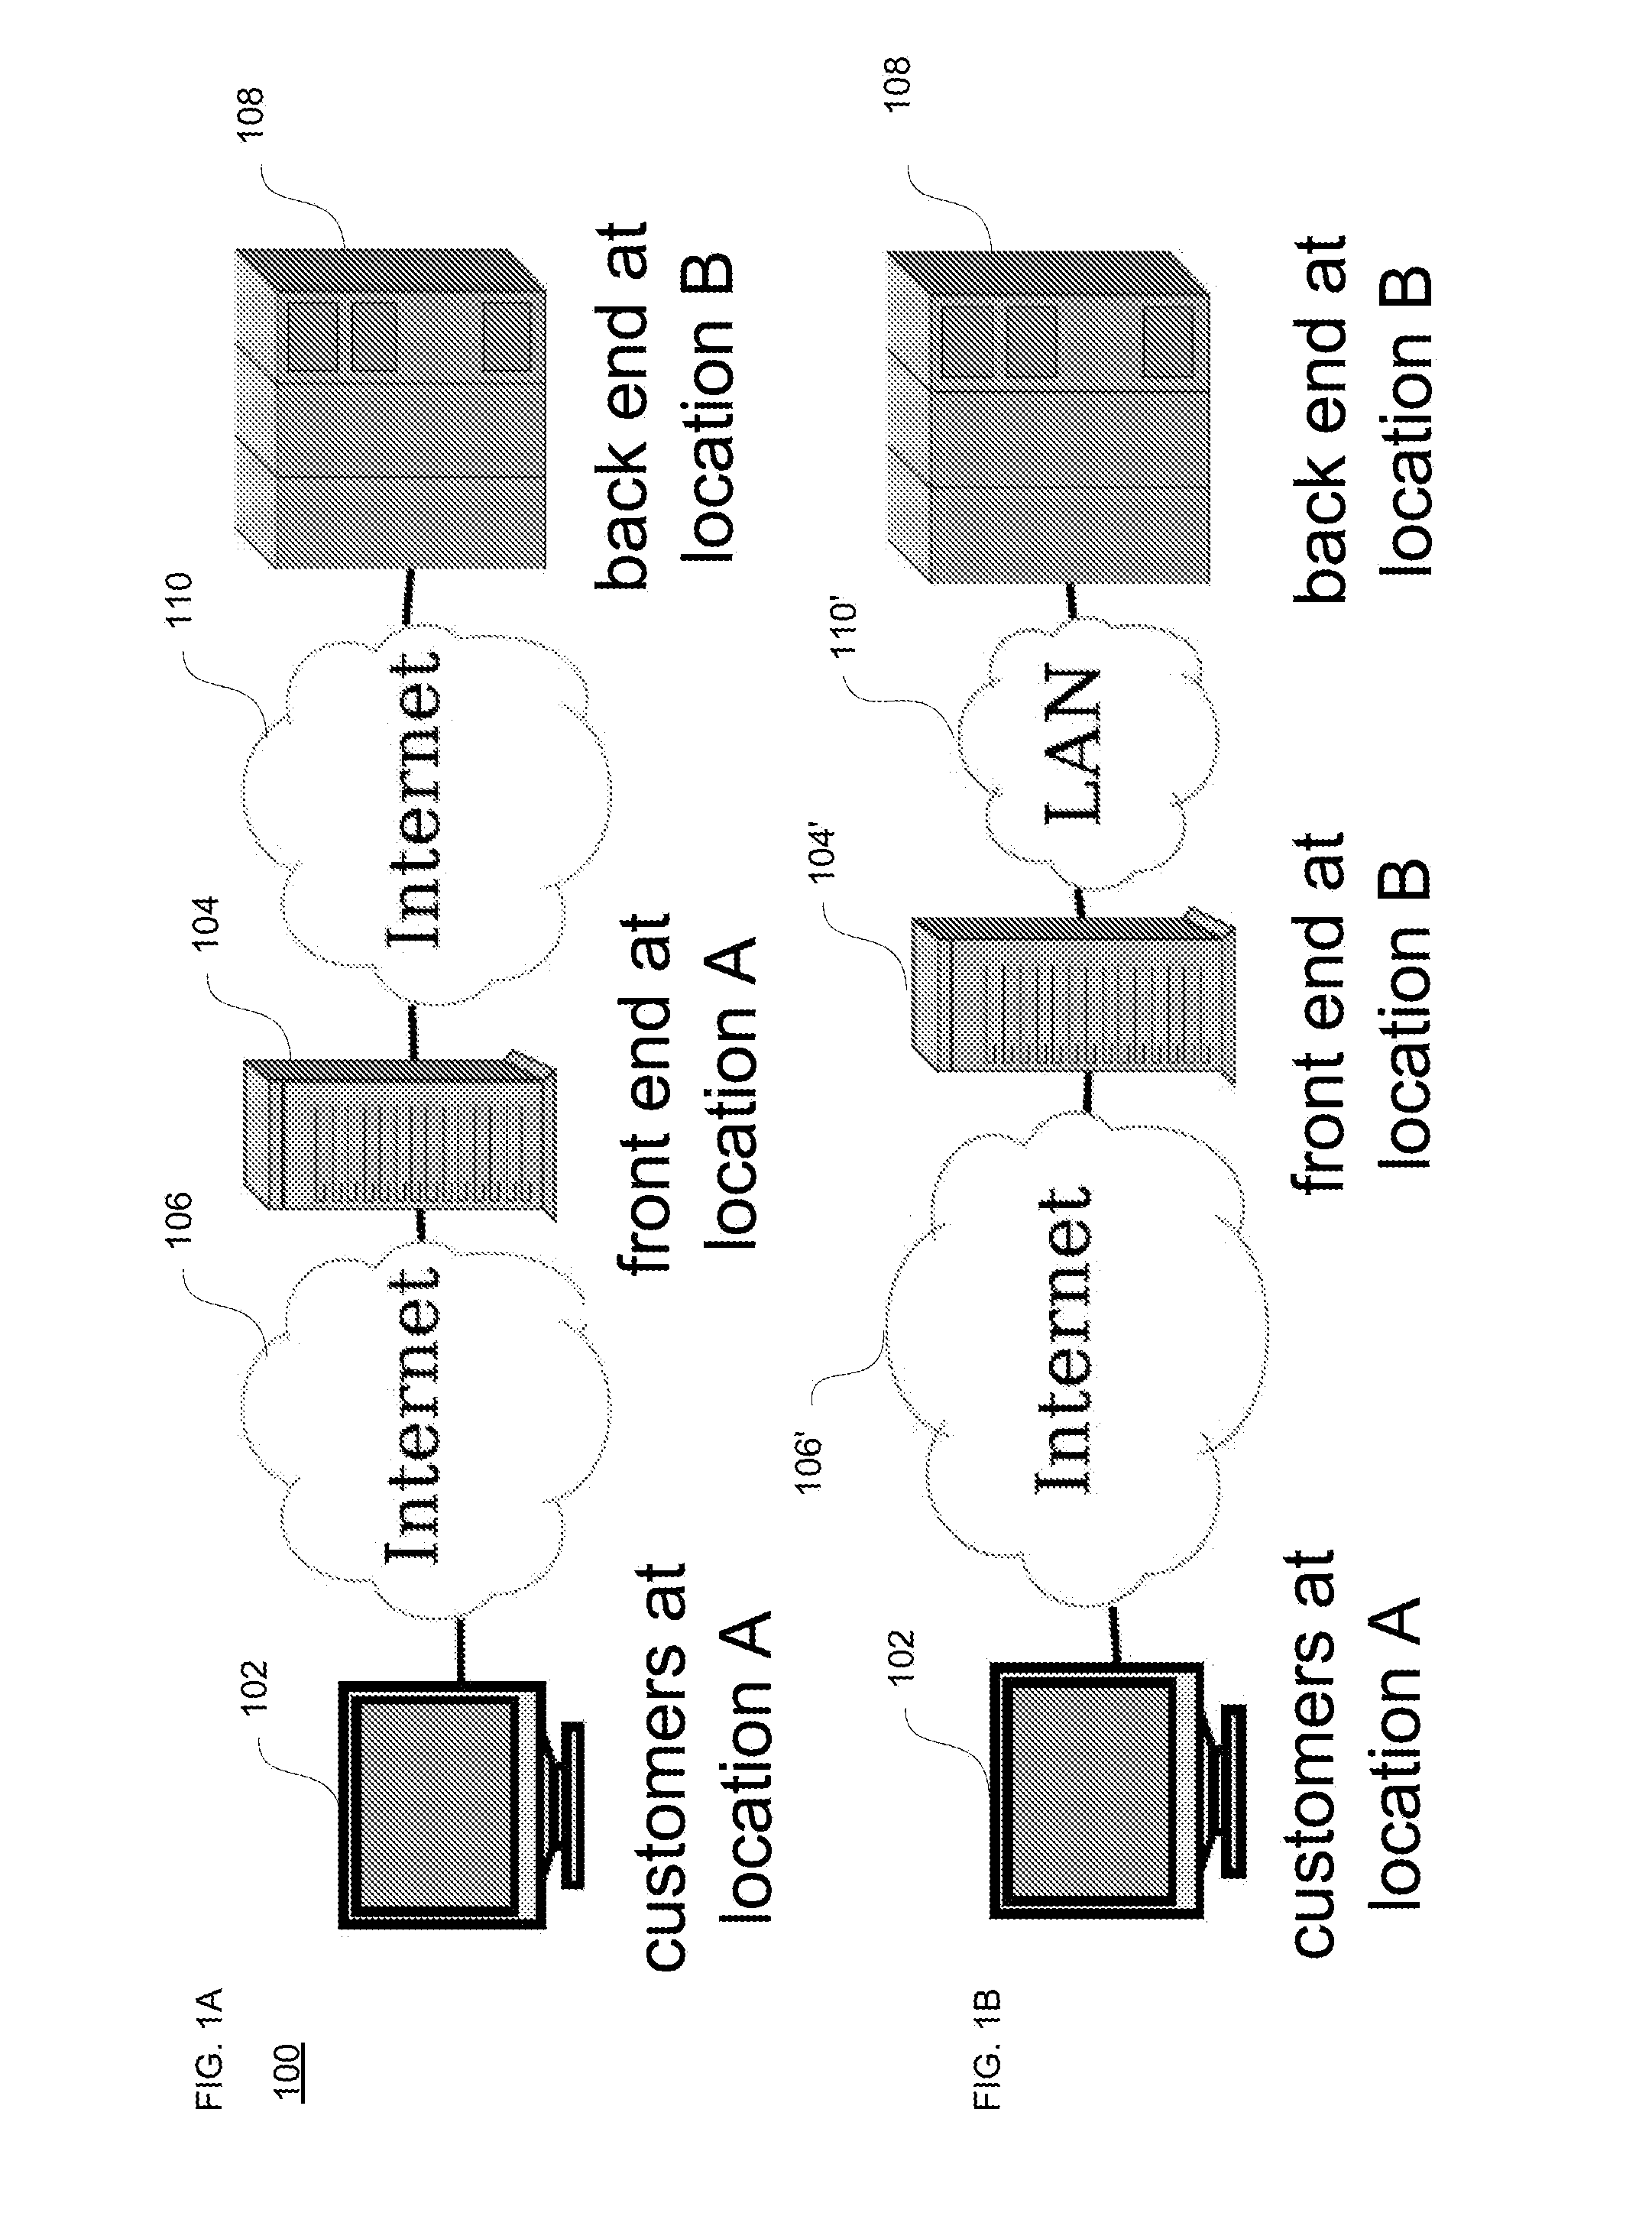 Methods and apparatus for predicting impact of proposed changes and implementations in distributed networks